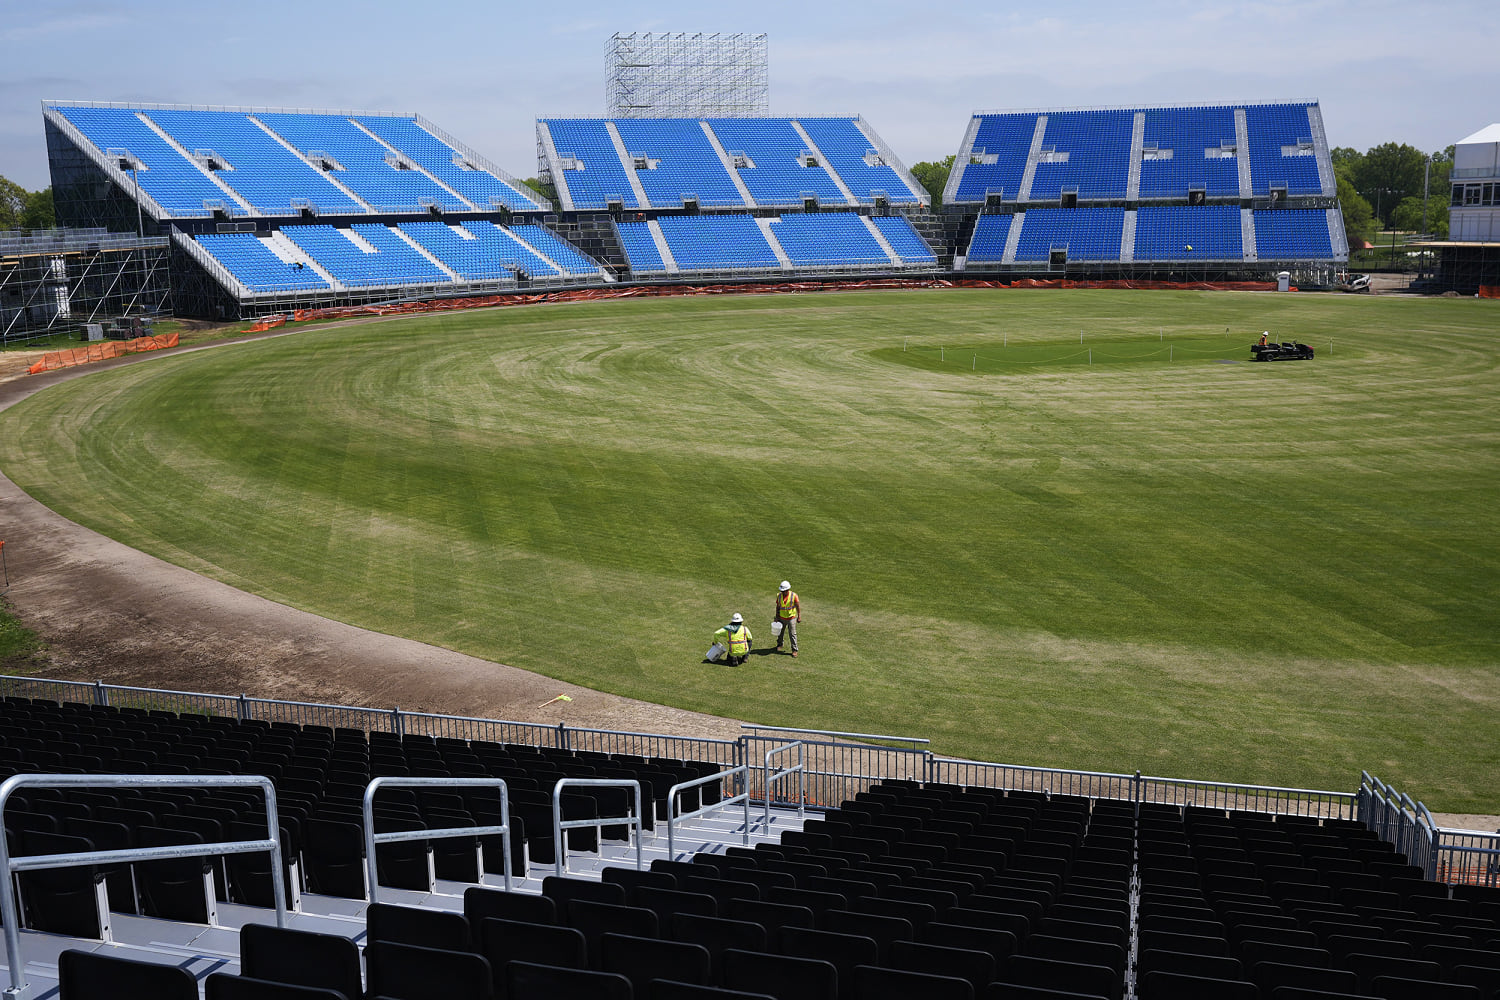 Pro-ISIS group posts ominous message showing Long Island cricket stadium set to host World Cup